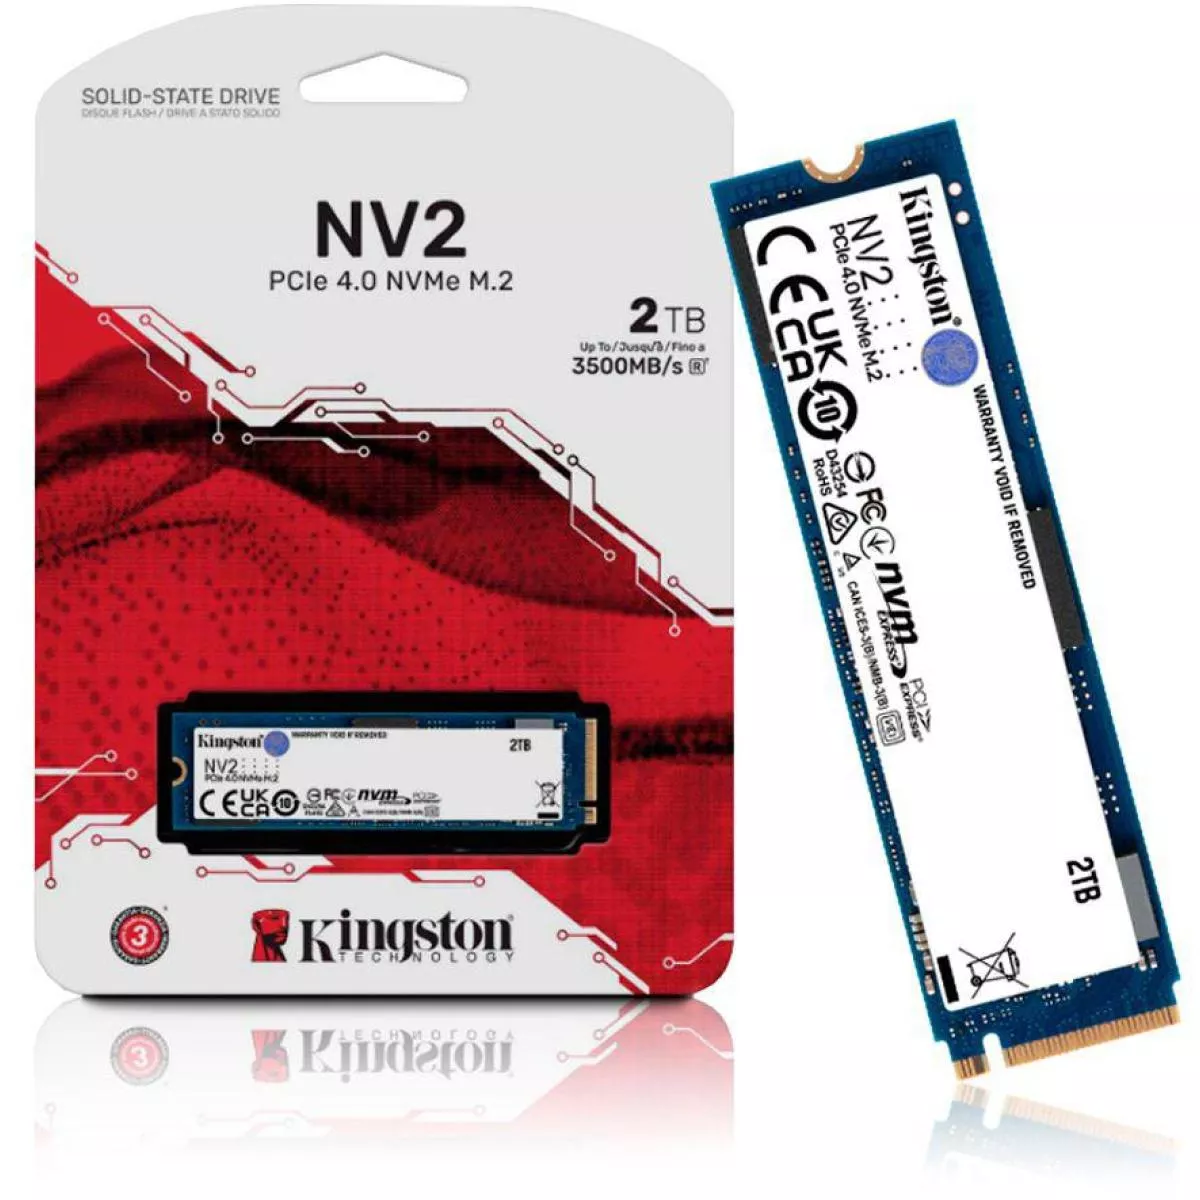 https://www.xgamertechnologies.com/images/products/2tb NAND NVMe PCIe M.2 {brand new SSD} Solid State Drive.webp